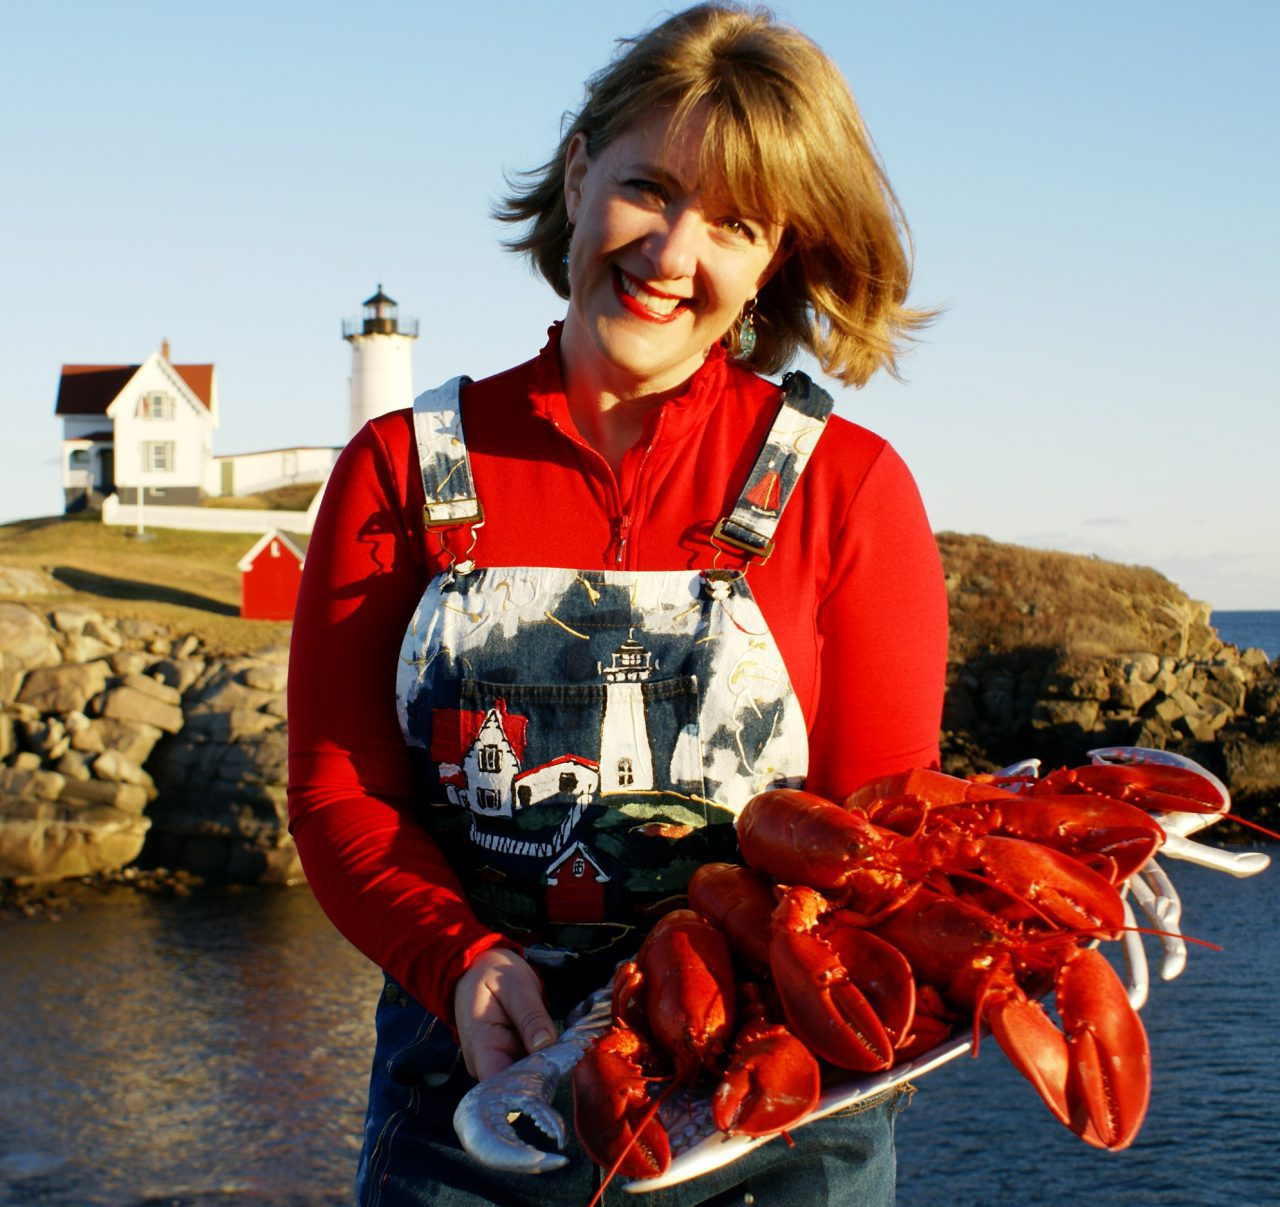 Steamed Lobsters at the Nubble Lighthouse in York, Maine